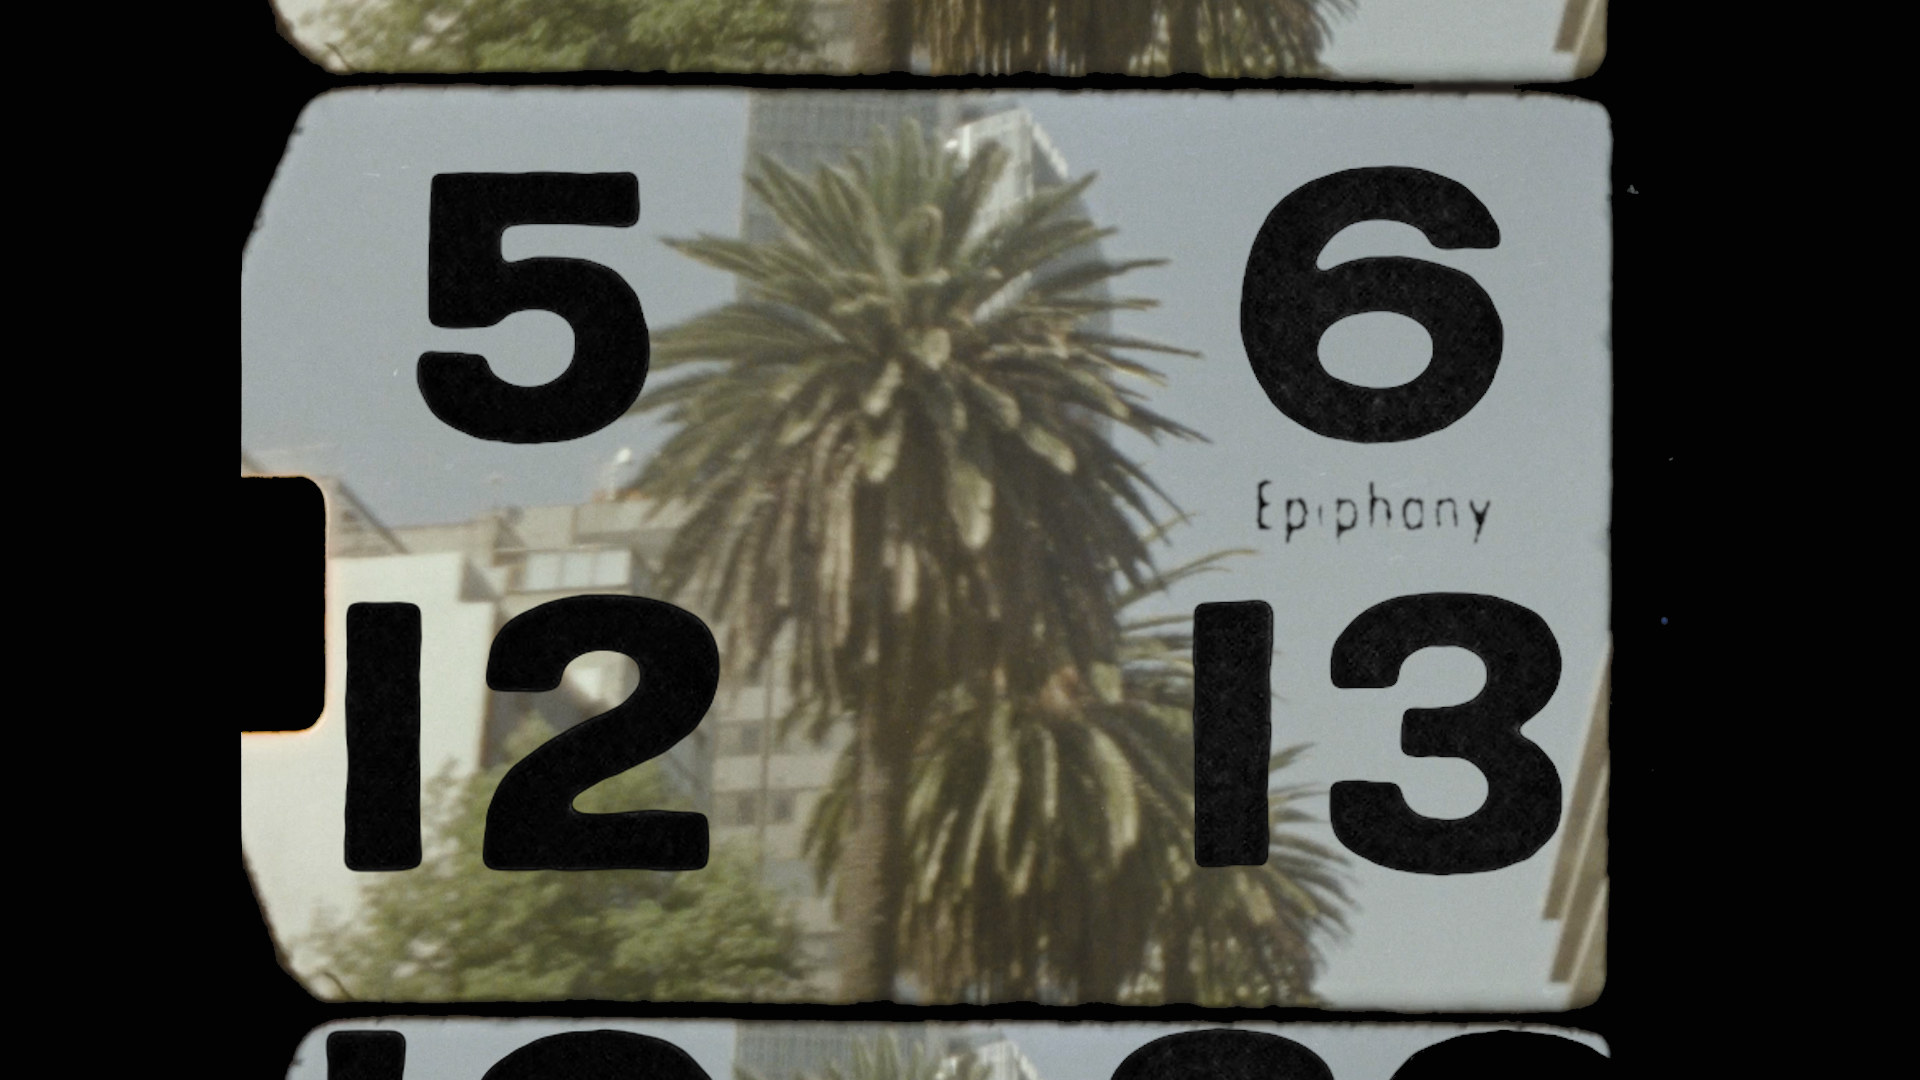 film strip of green palm trees, a tall building with big black numbers 12, 6, 12, 13 and the word 